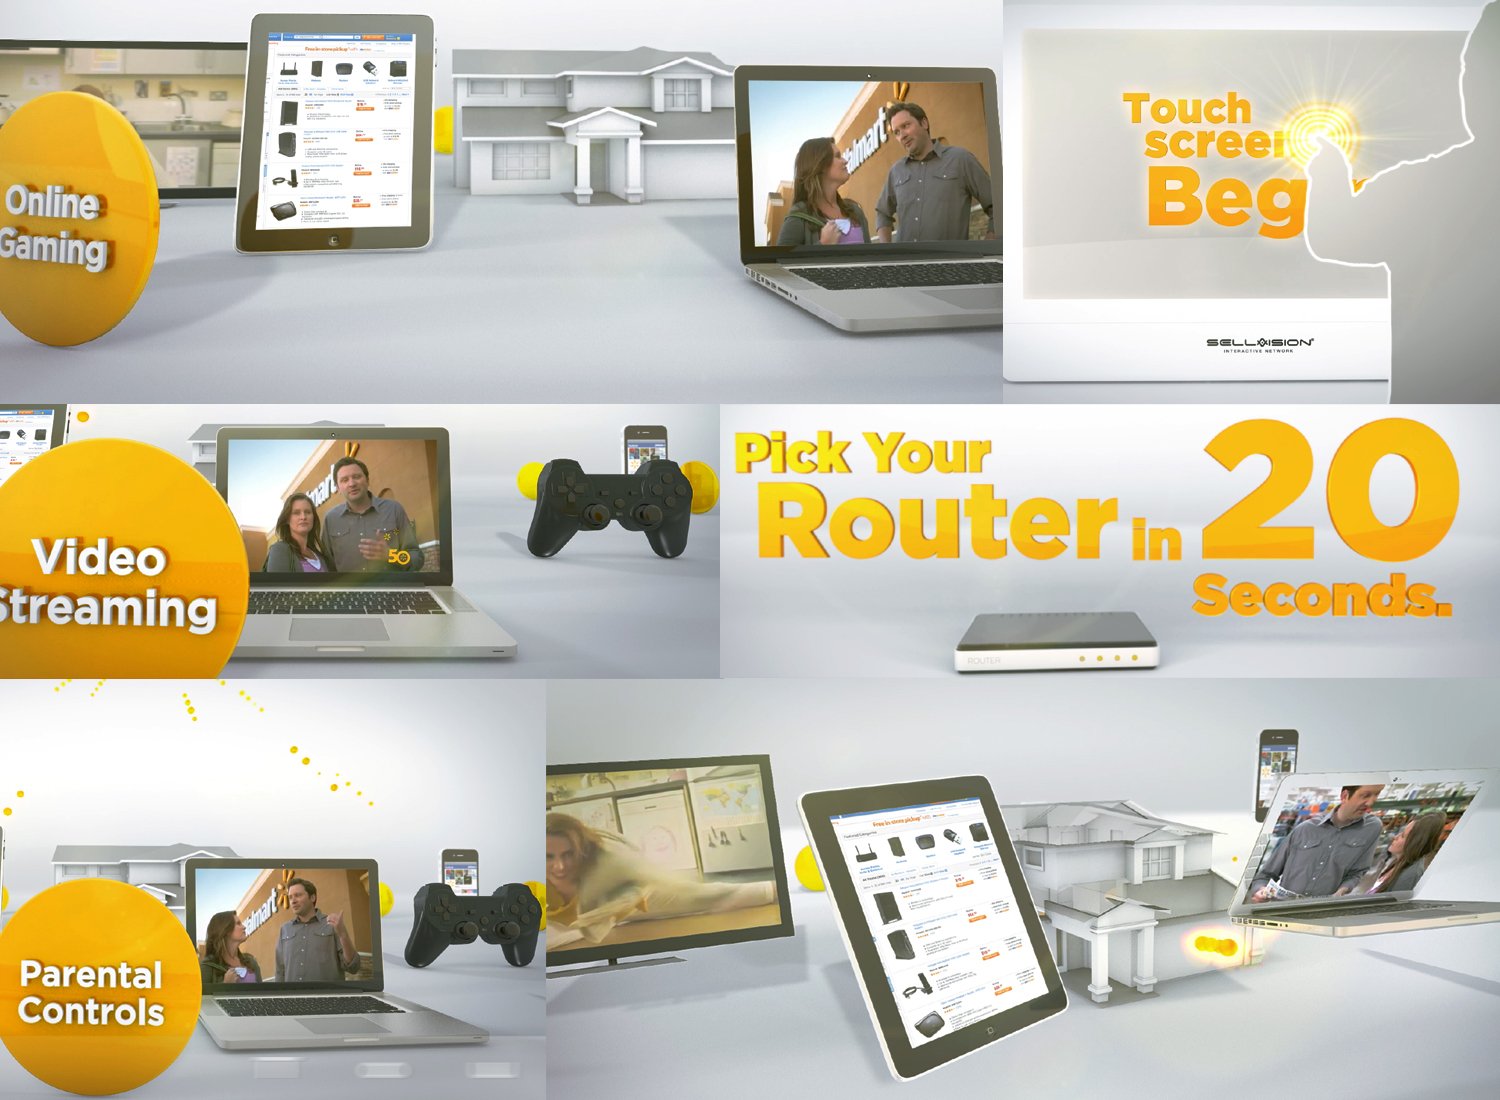 Pick Your Router (Copy)